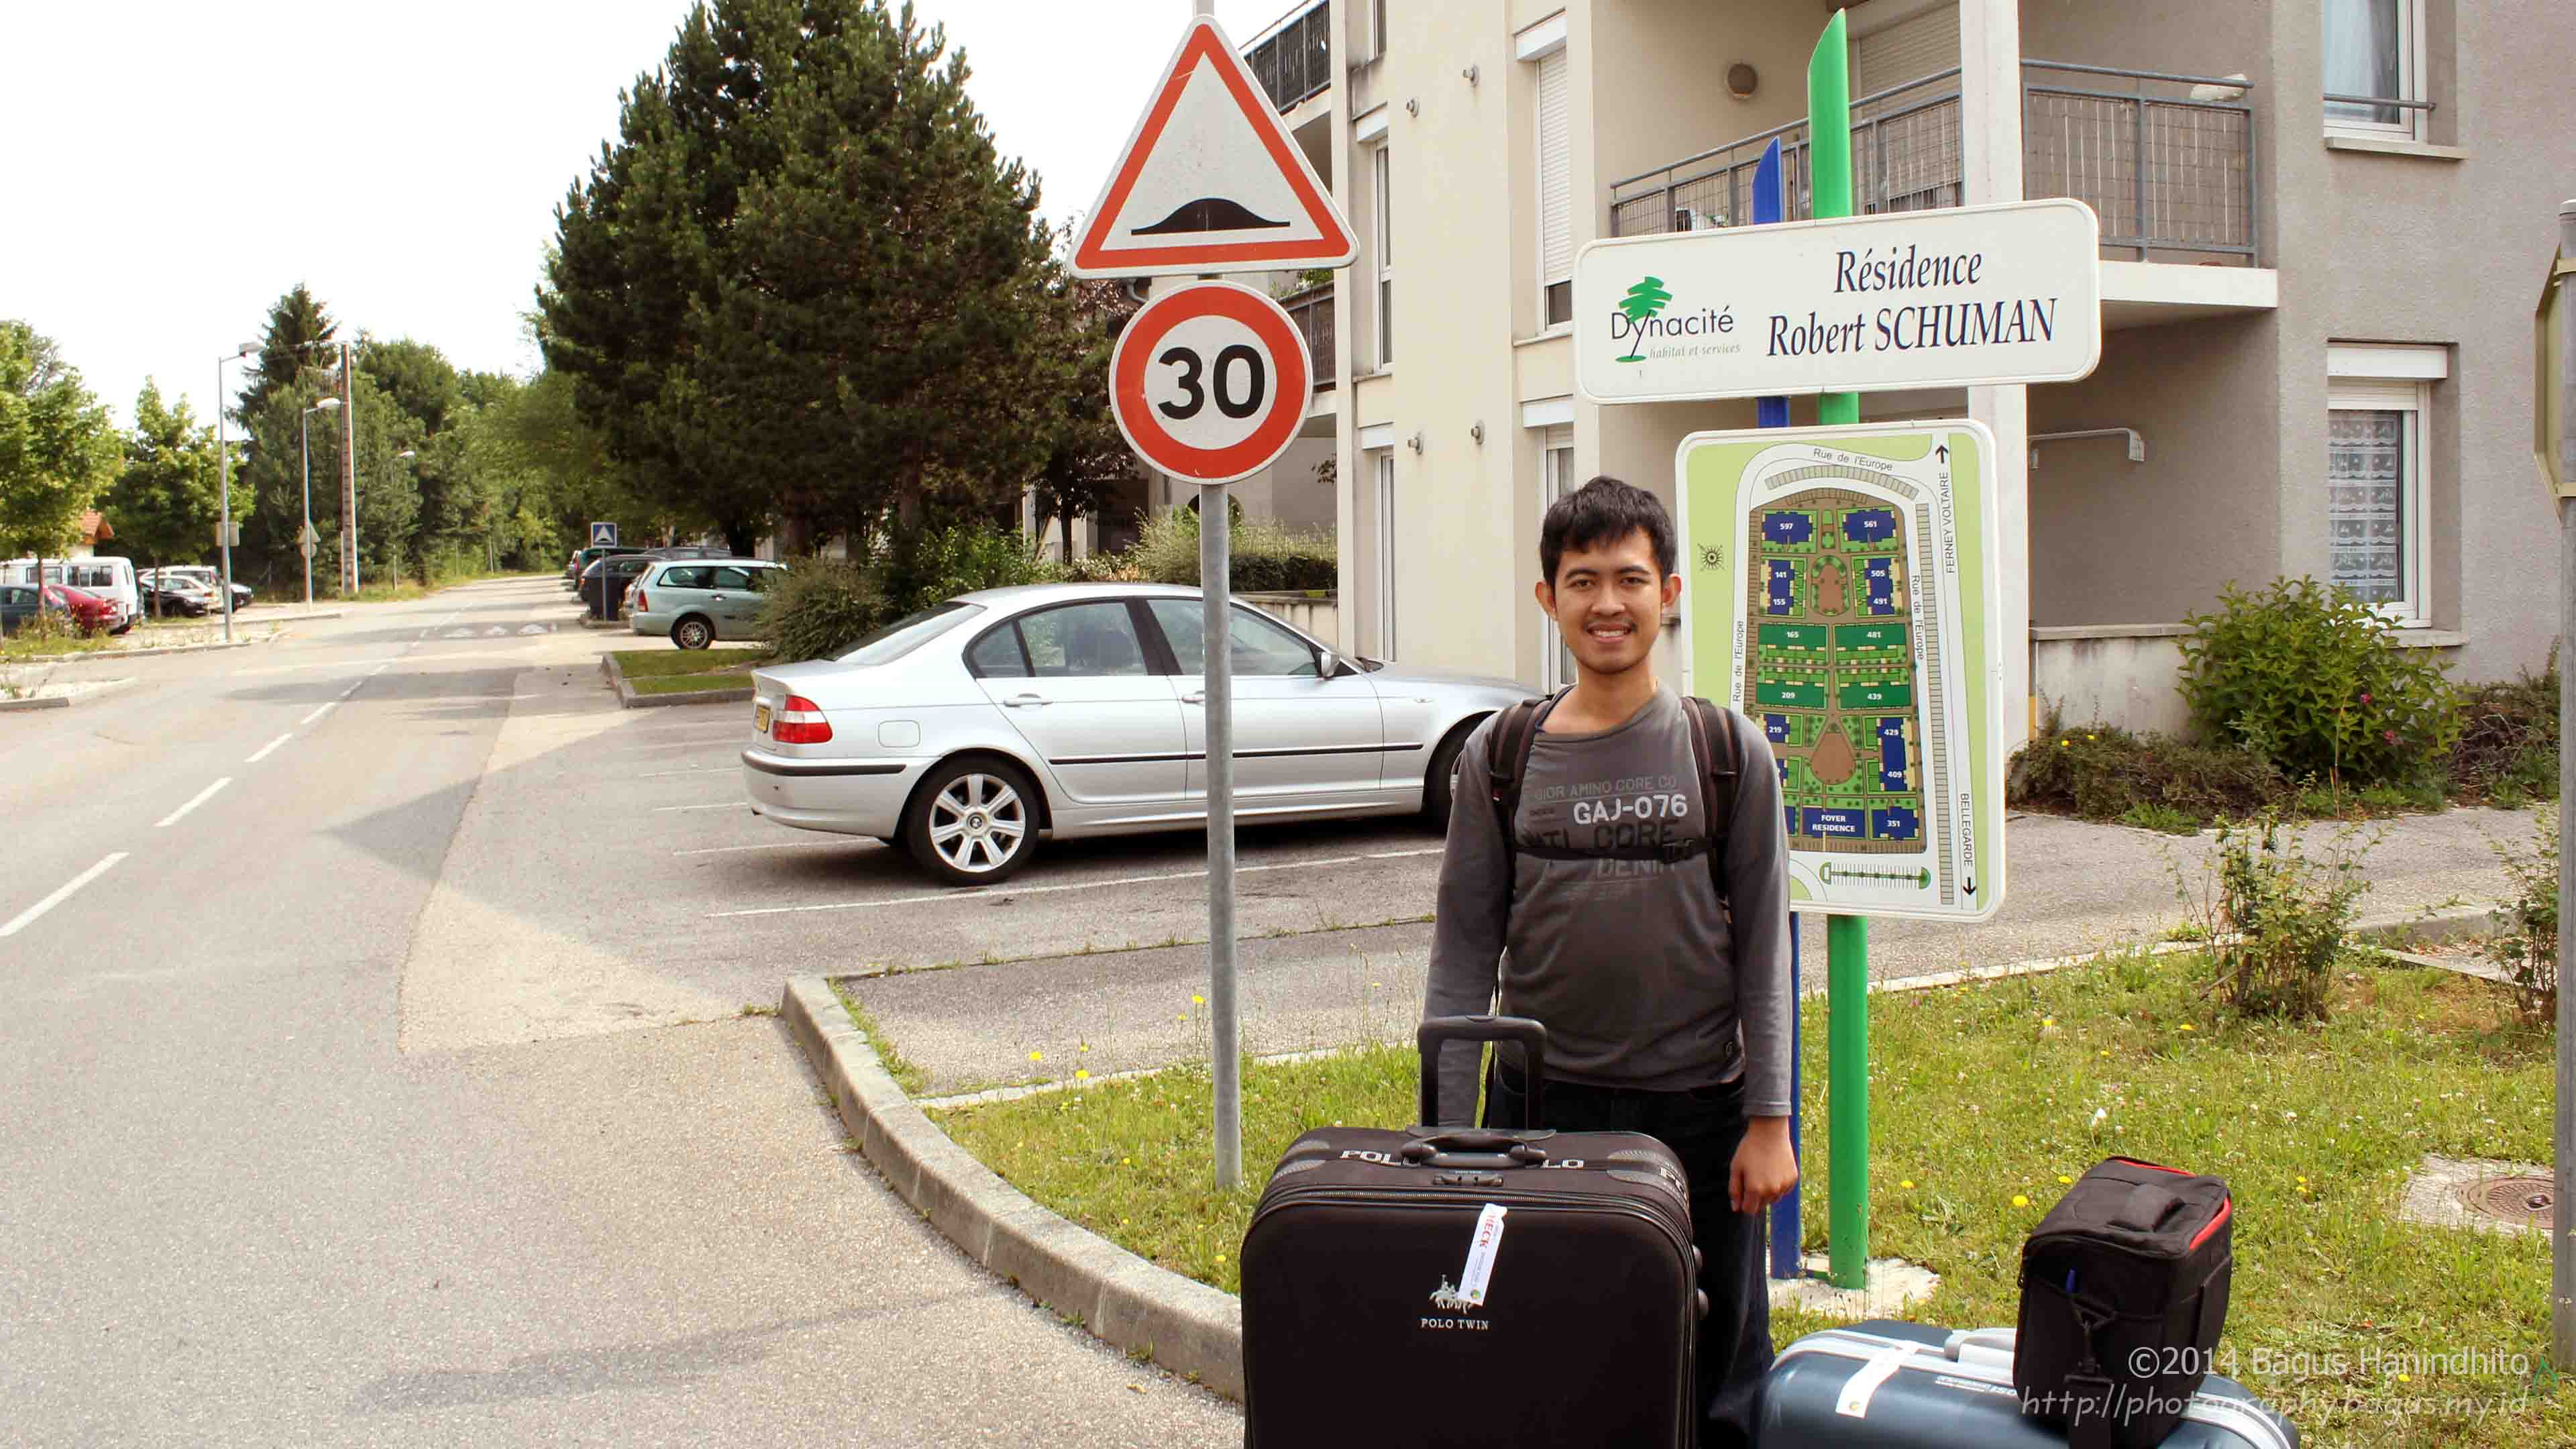 Finally I arrived at CERN Saint Genis Hostel. It was situated in a peace and quite environment with gorgeous landscape.